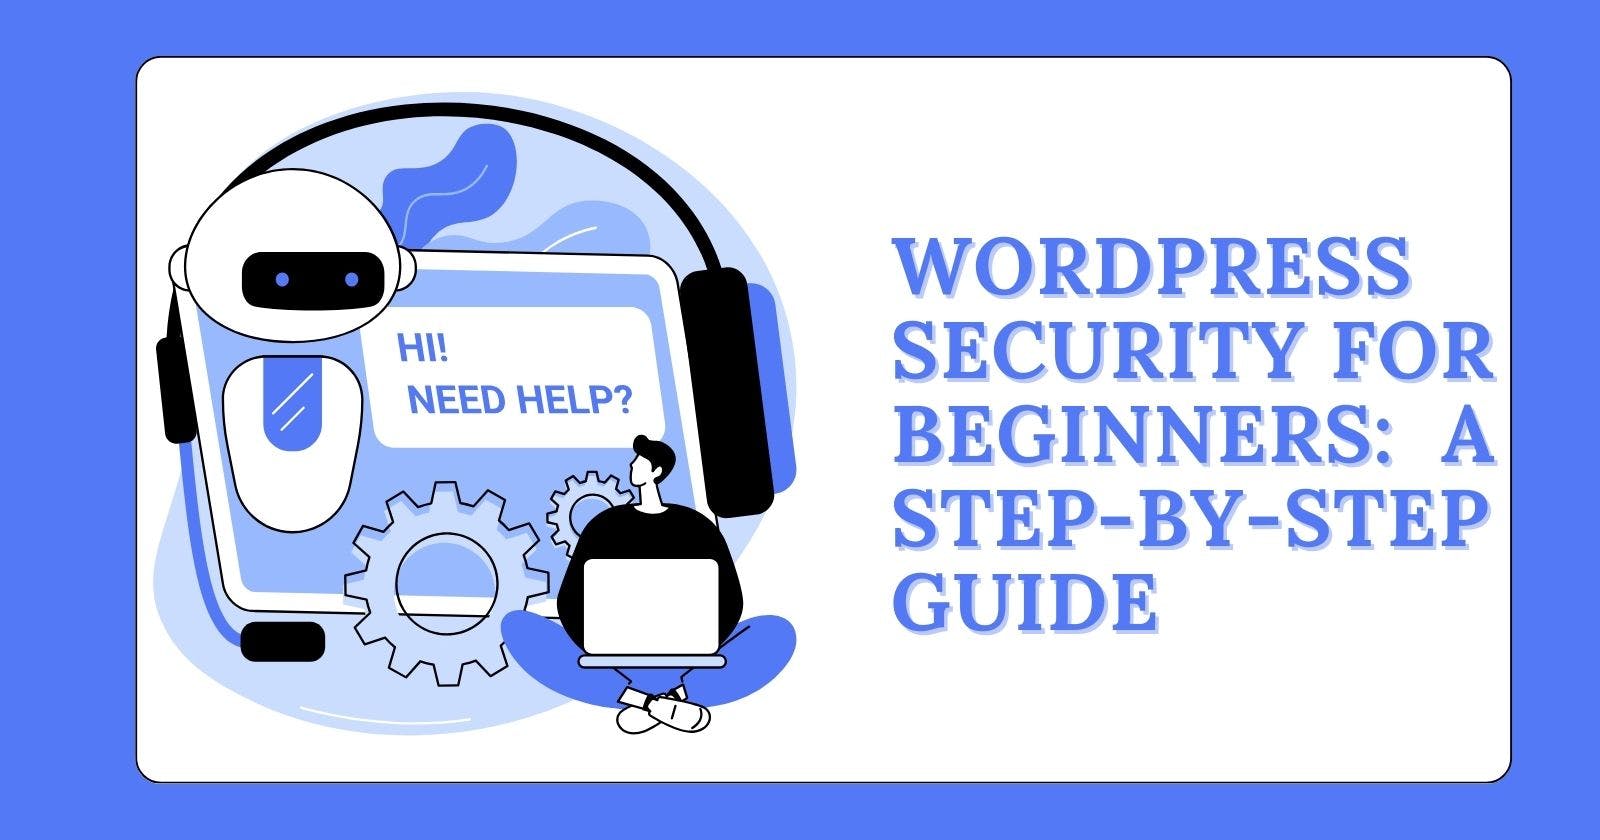 WordPress Security for Beginners: A Step-by-Step Guide